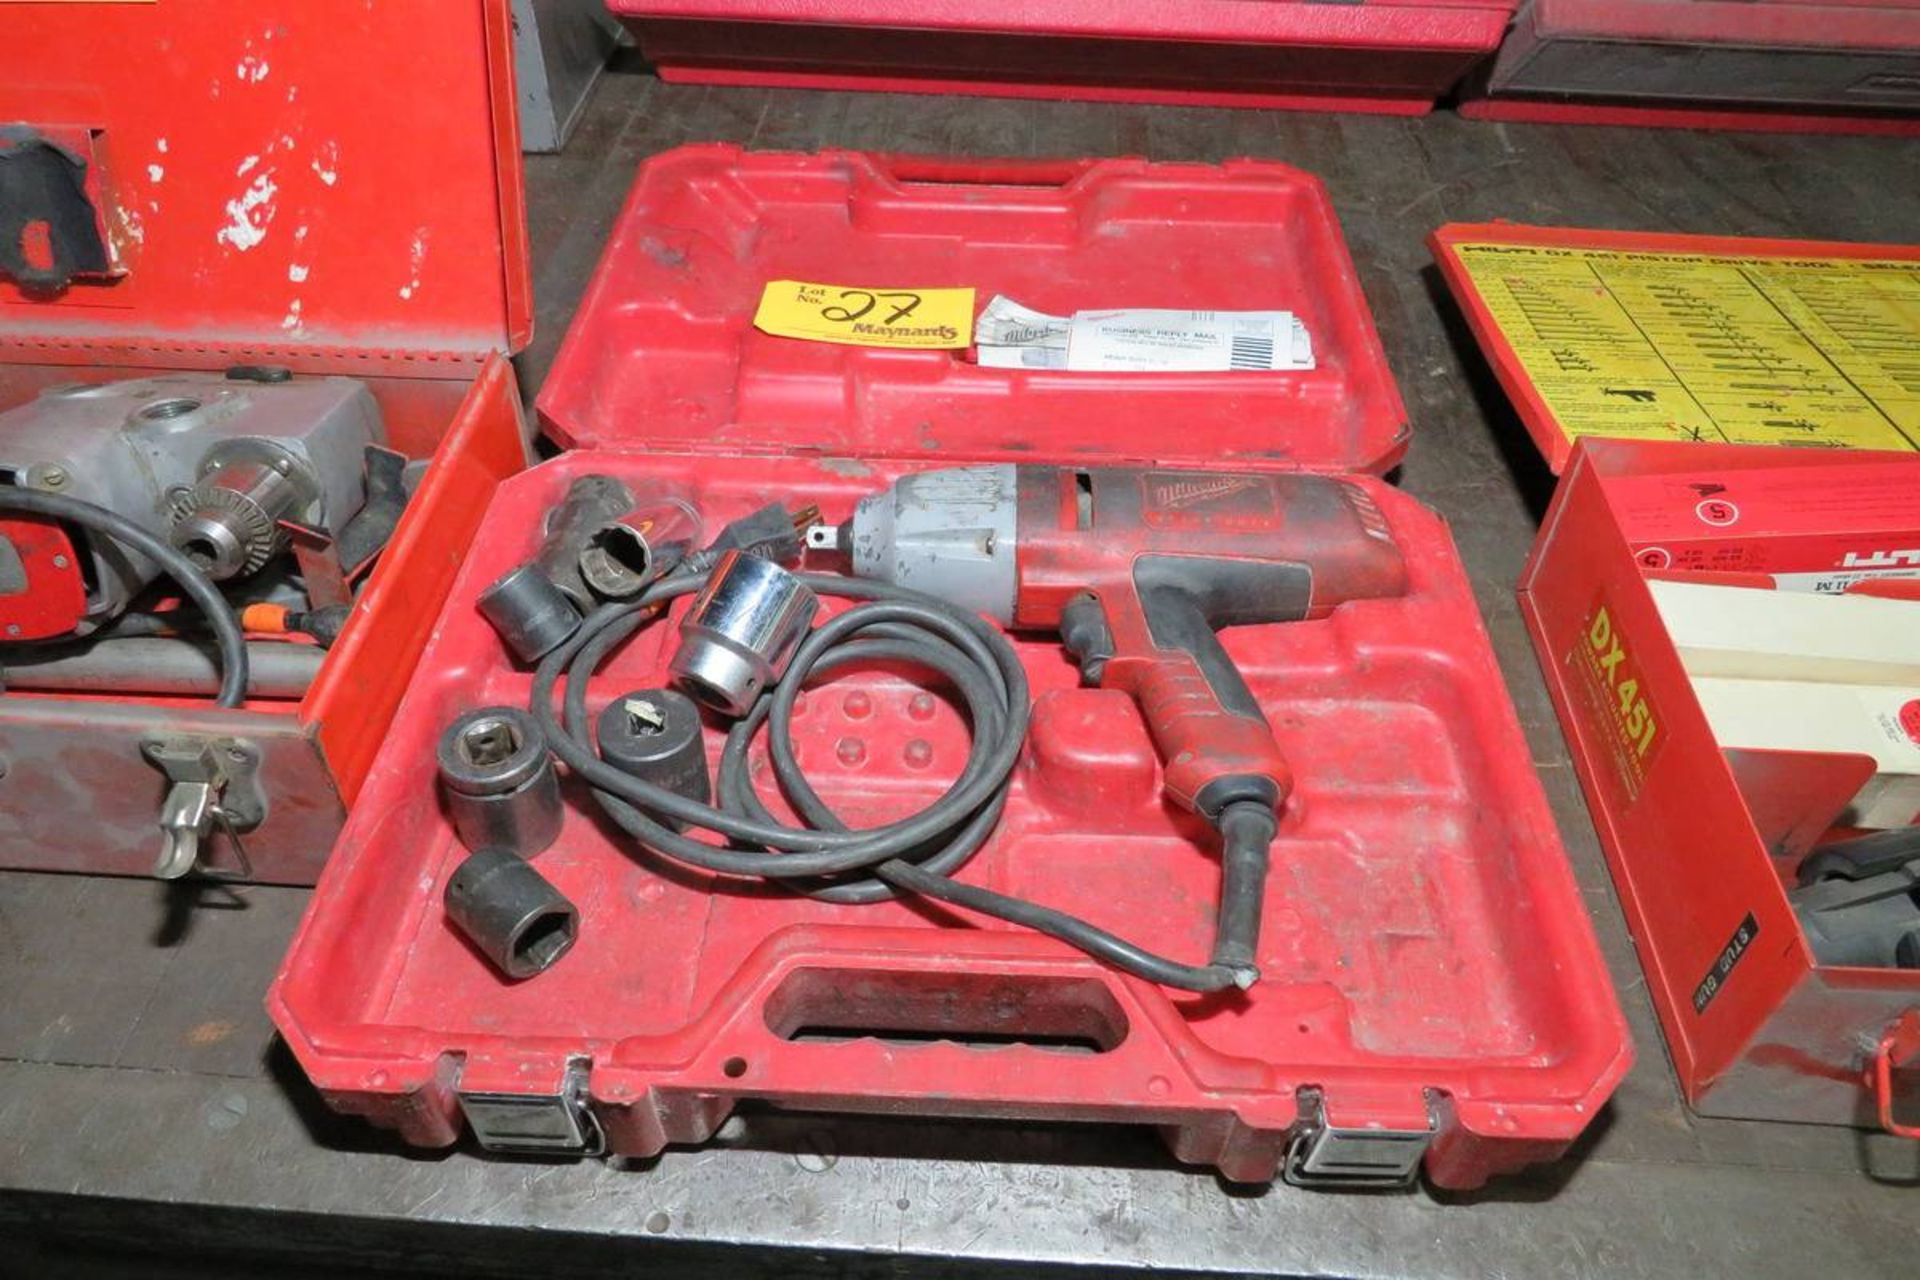 Milwaukee 1/2" Electric Impact Wrenches